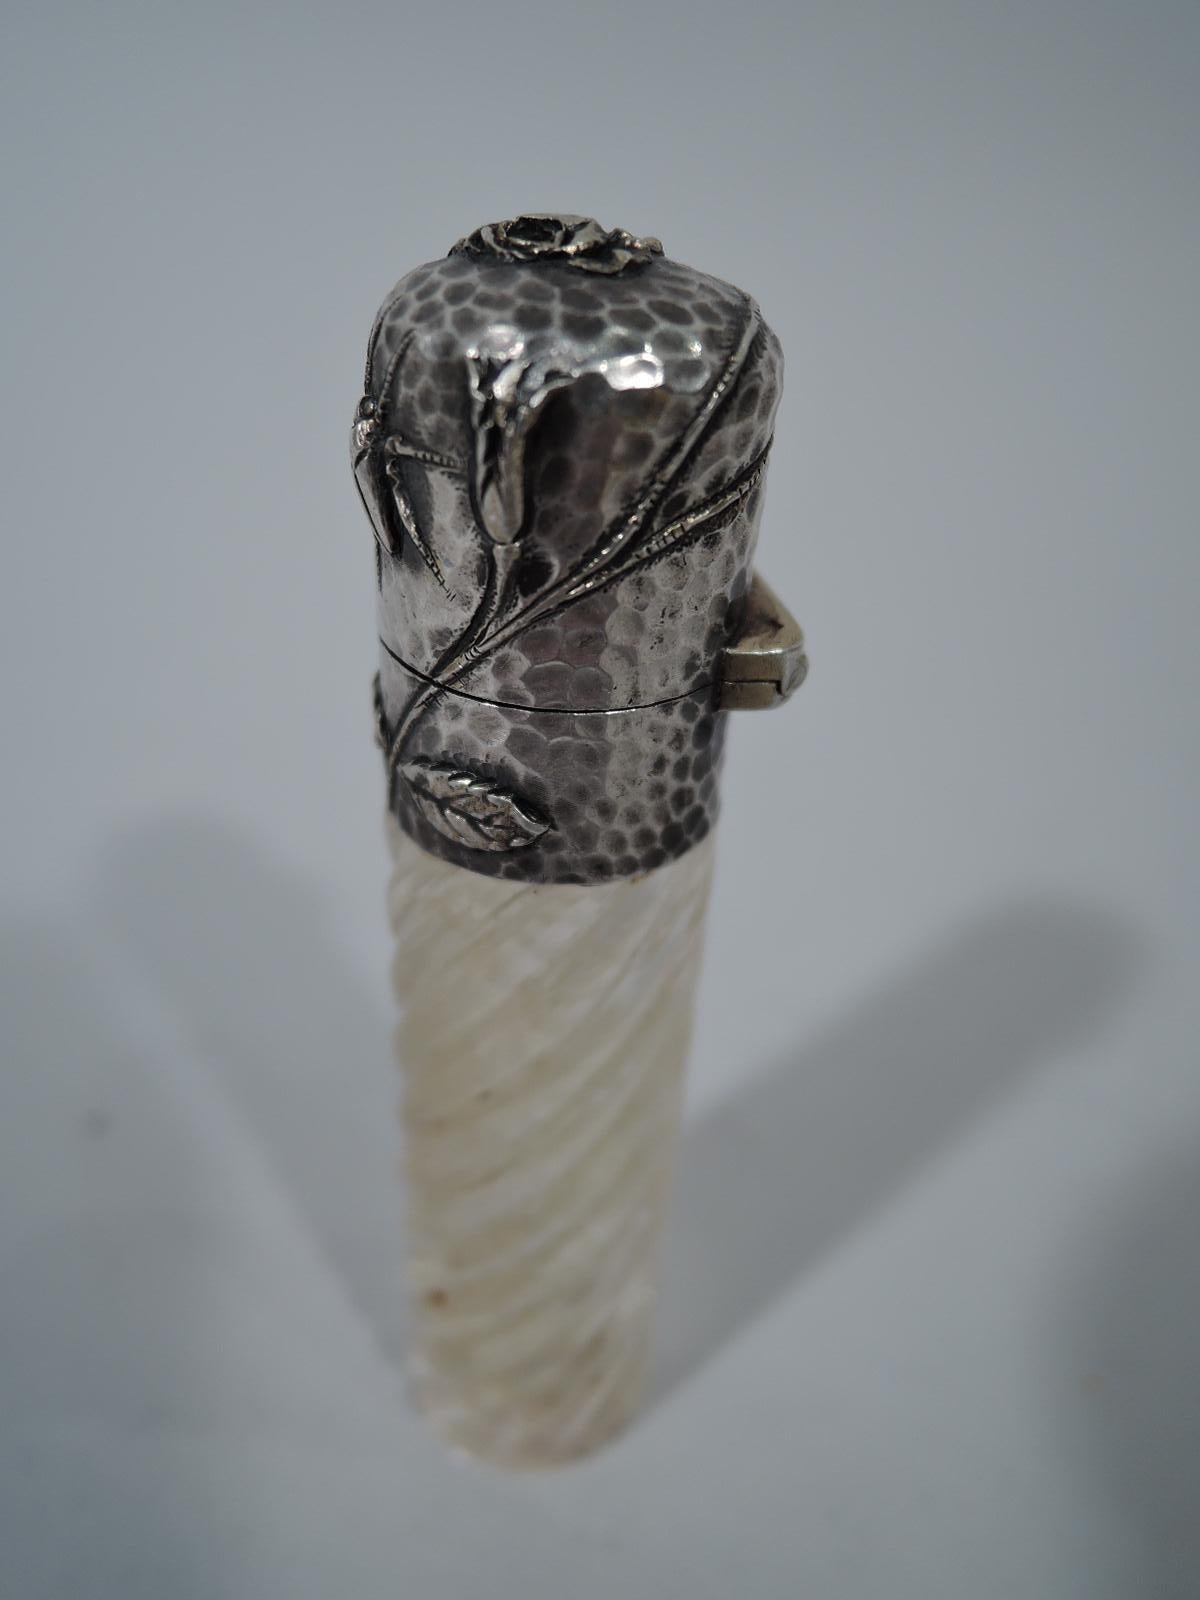 American applied sterling silver perfume vial, ca 1880. Clear glass cylinder with twisted fluting. Sterling silver collar and hinged cover with tendril, flower, and insect on hand-hammered ground; gilt interior. Unmarked.